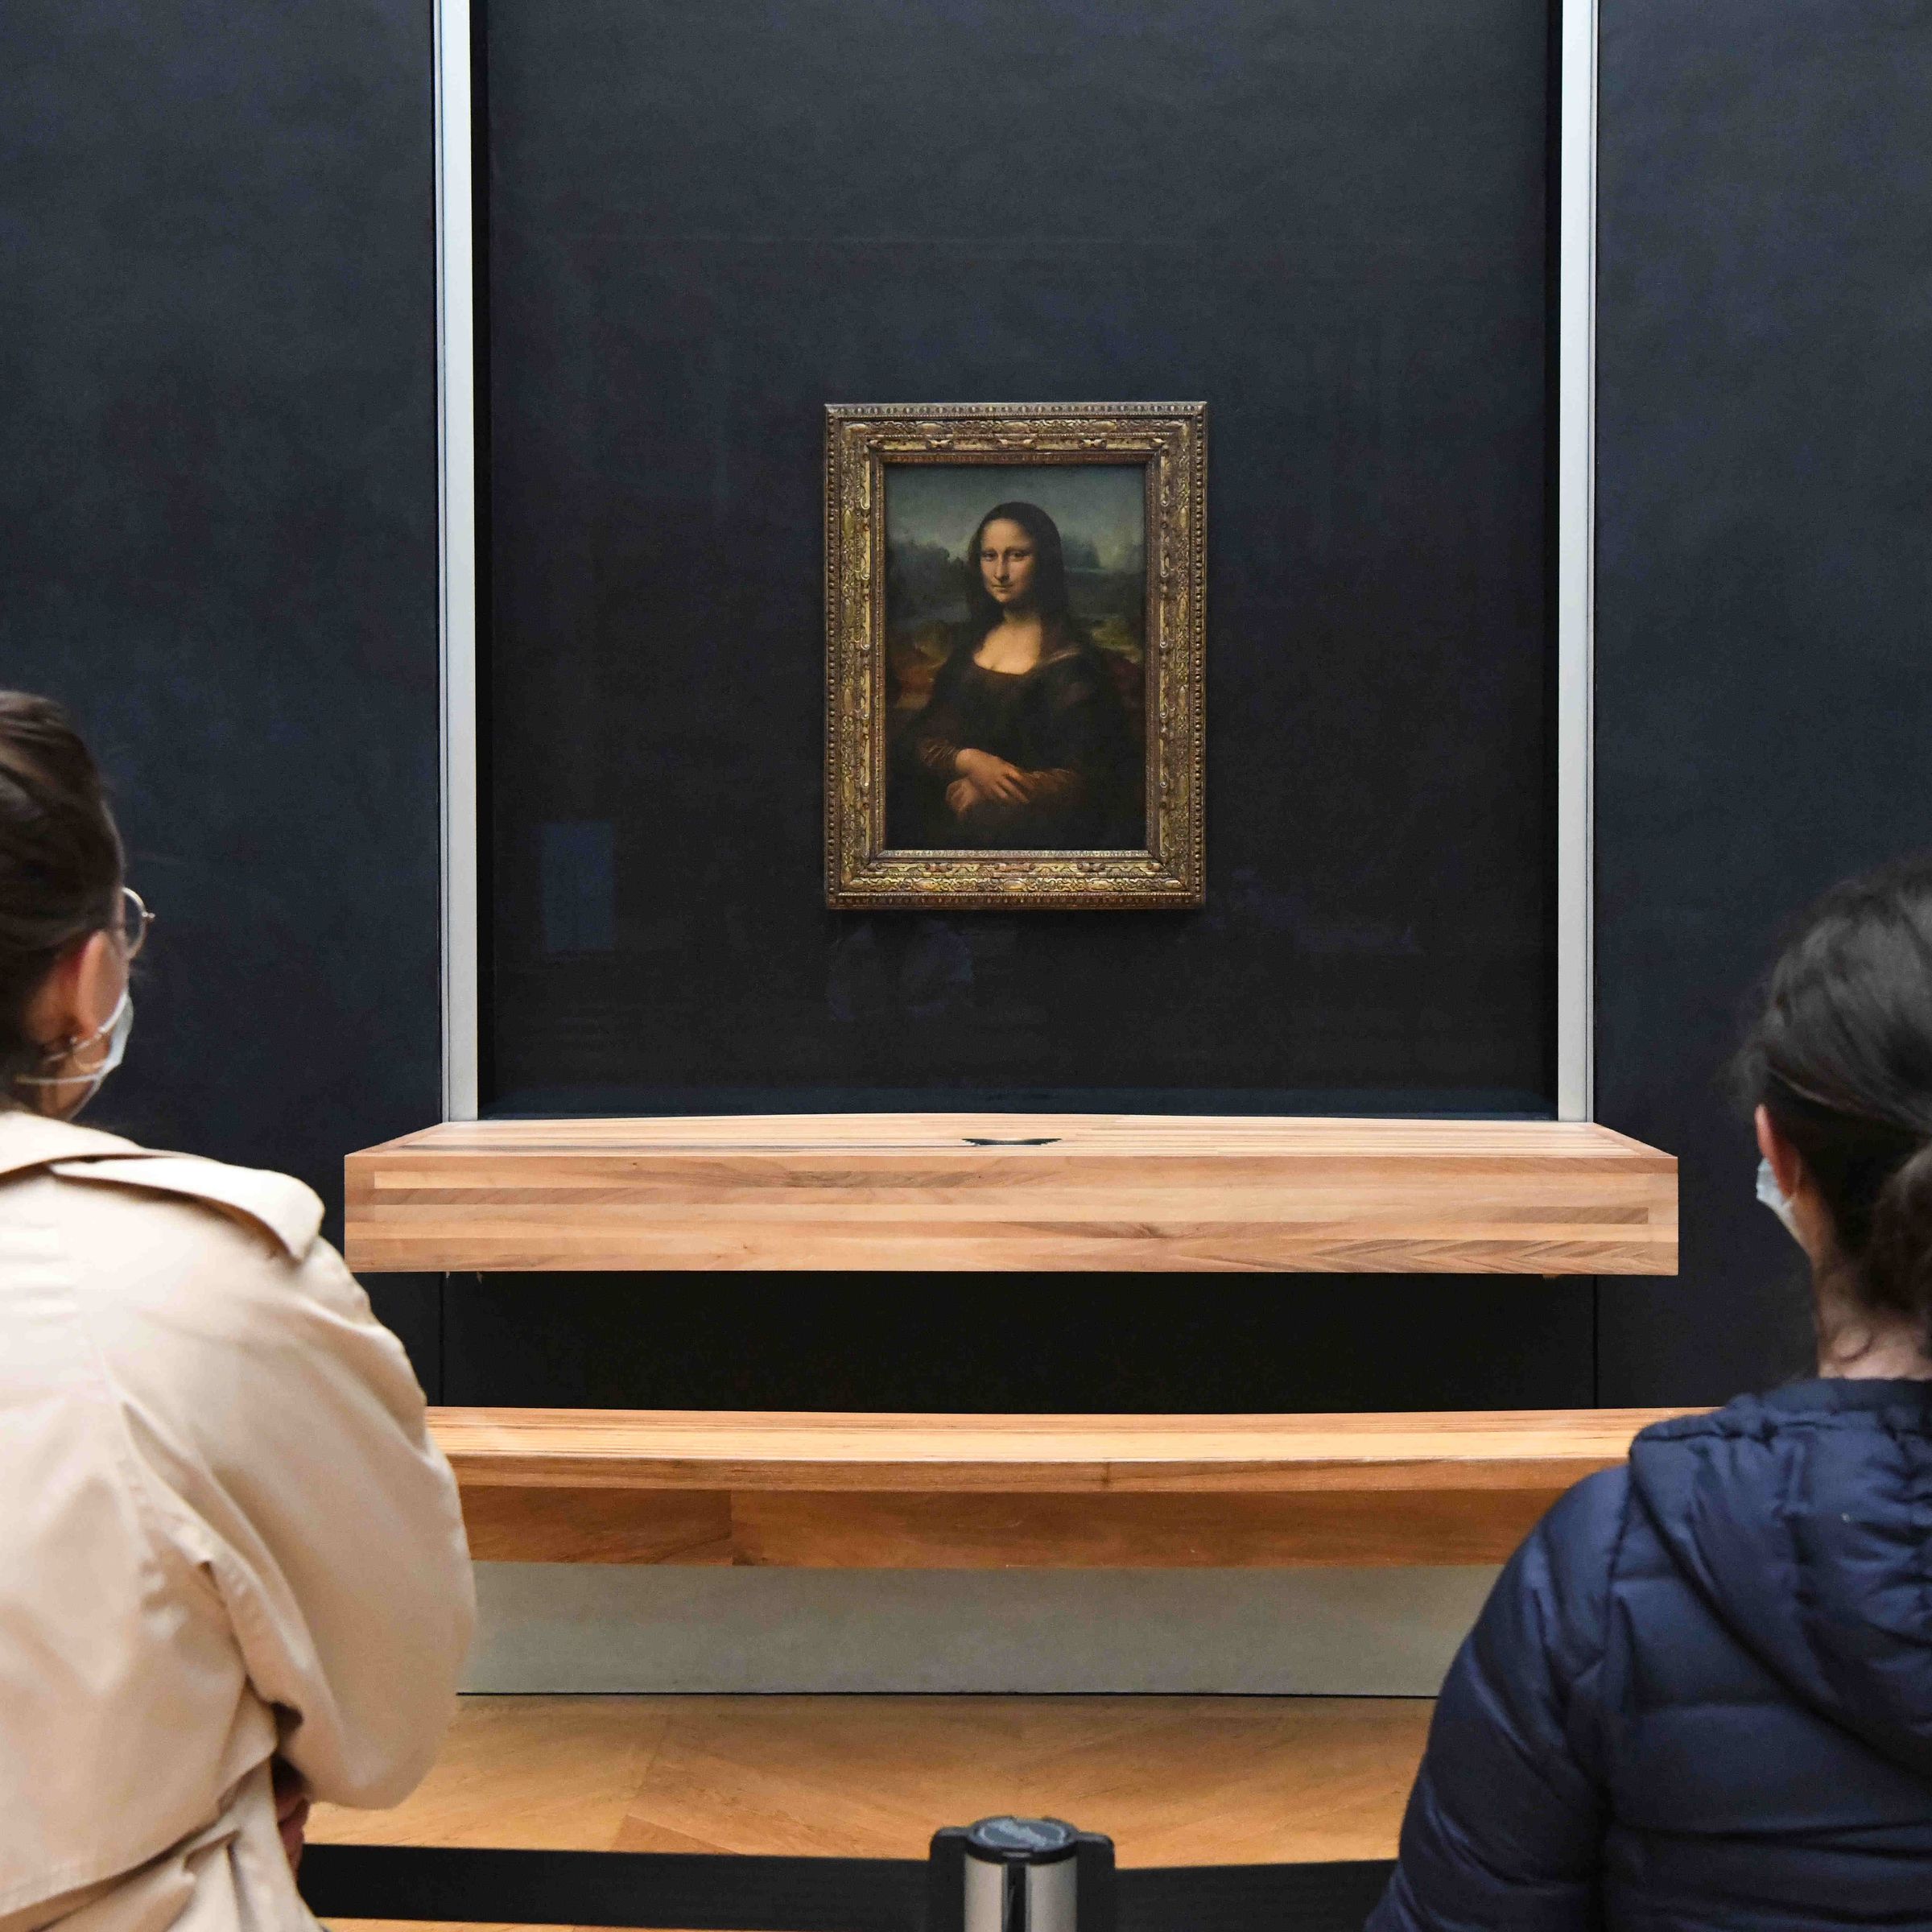 Two people viewing the Mona Lisa